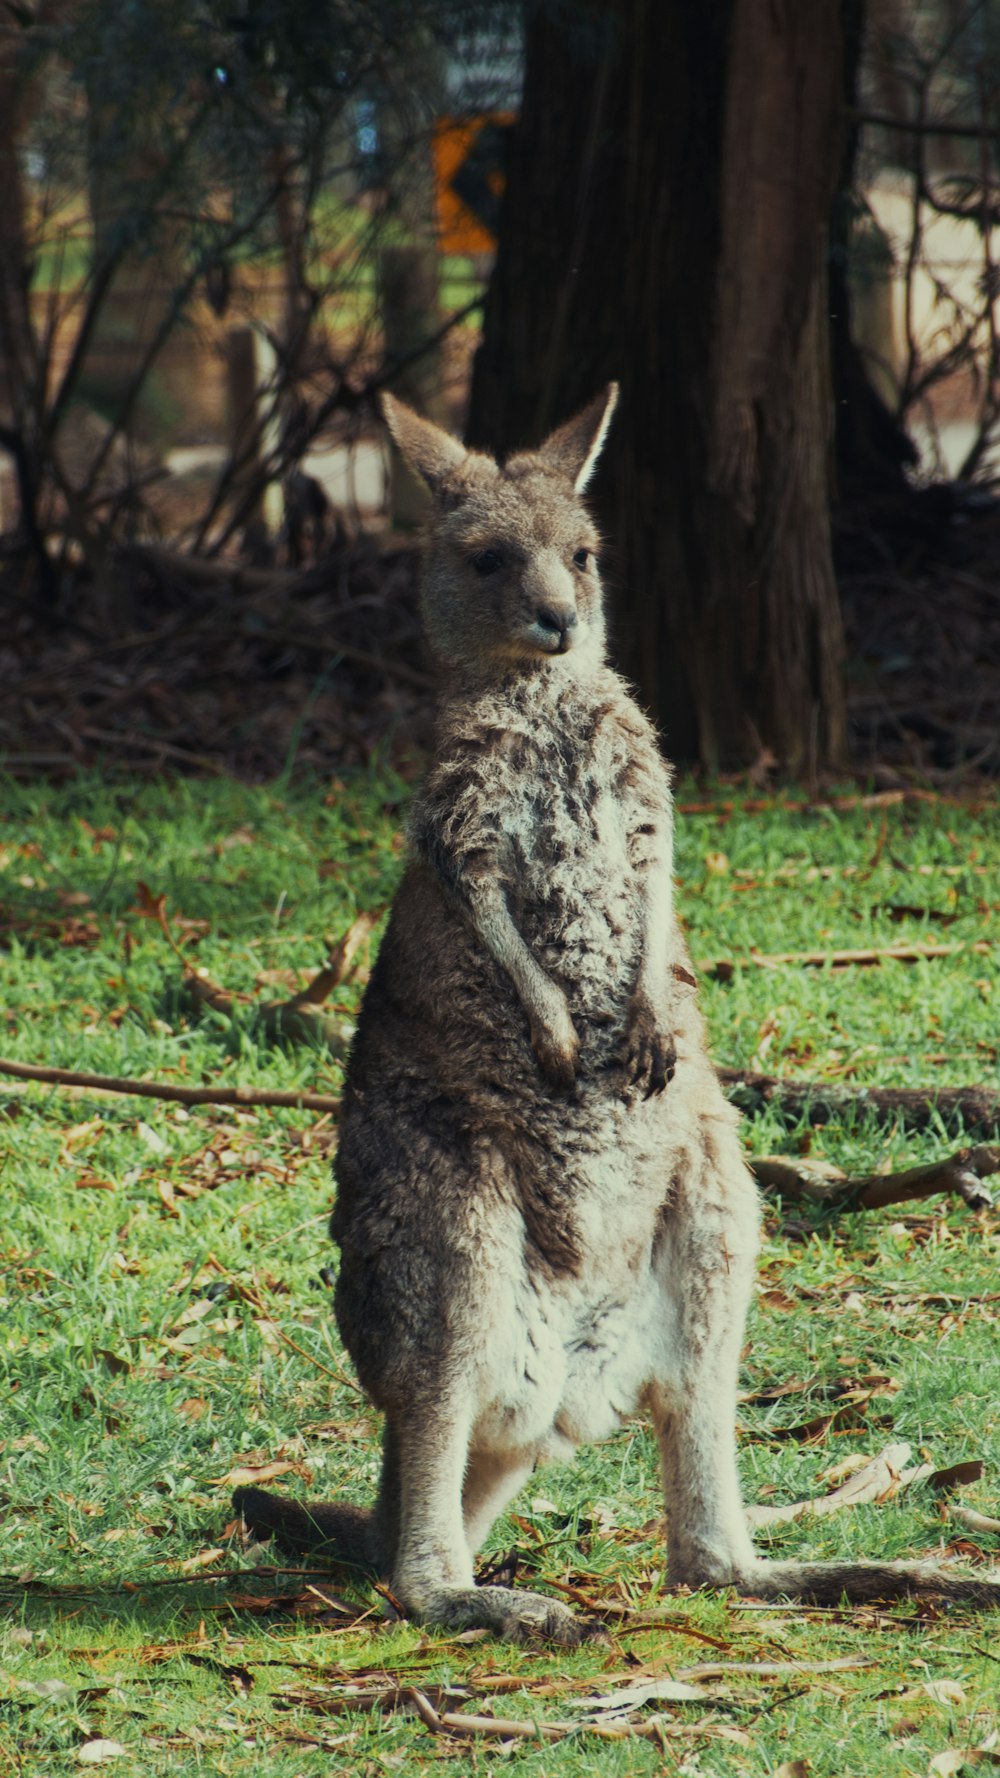 a kangaroo standing in a grassy area